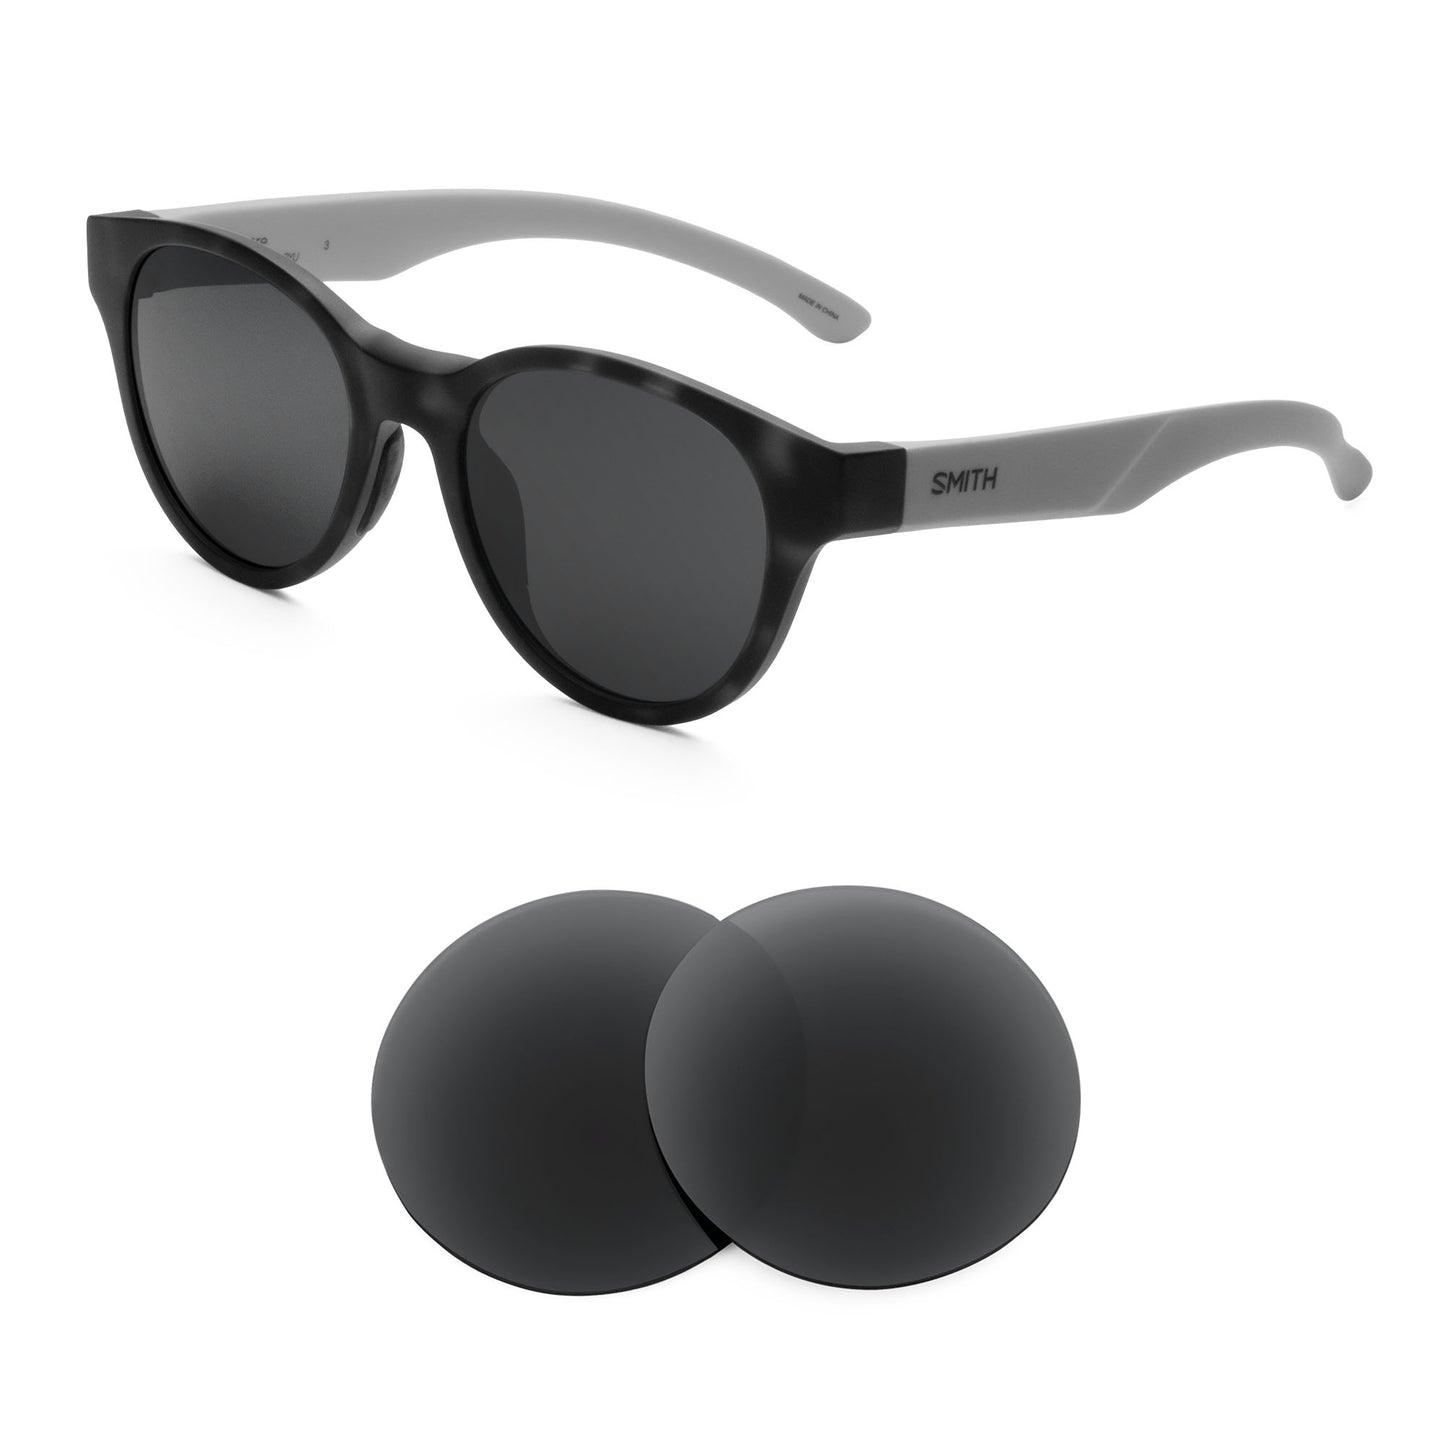 Smith Snare sunglasses with replacement lenses